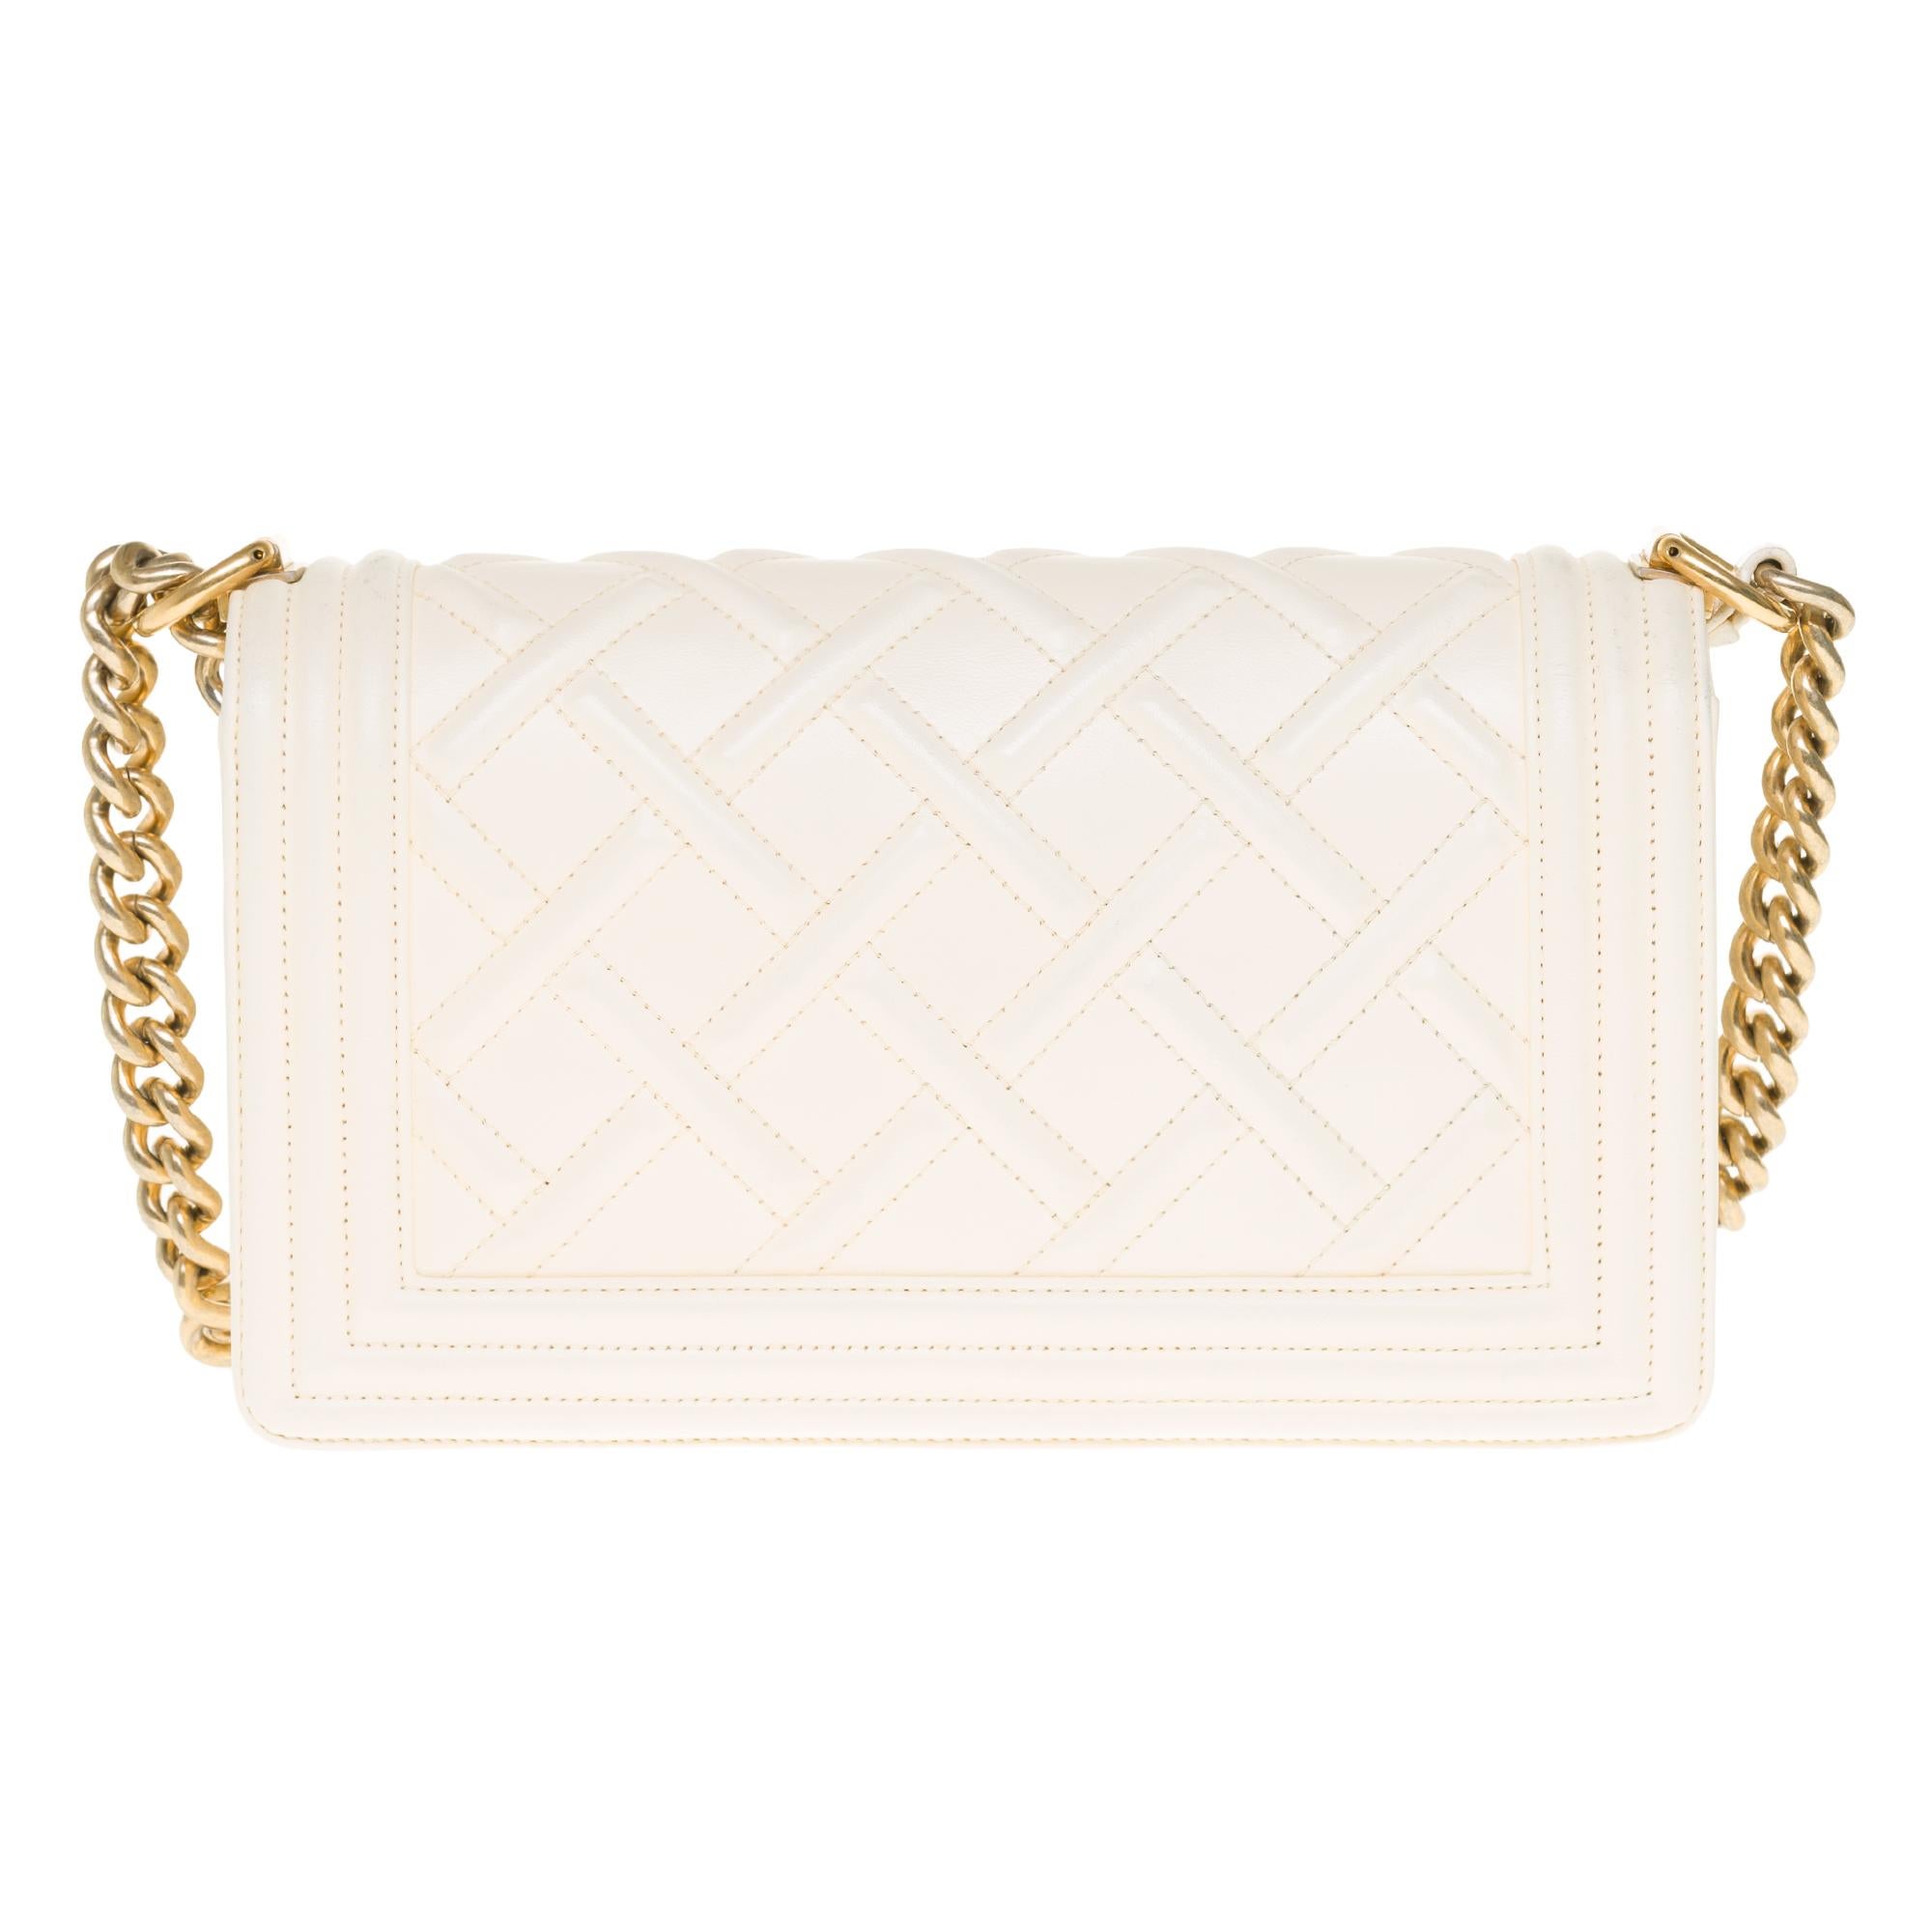 LIMITED EDITION // Celtic Boy from the Collection Paris-Edinburgh

The iconic Chanel Boy old medium shoulder bag from the limited collection Celtic Paris-Edinburgh in ivory embossed leather, gold metal trim, an adjustable chain handle in gold metal